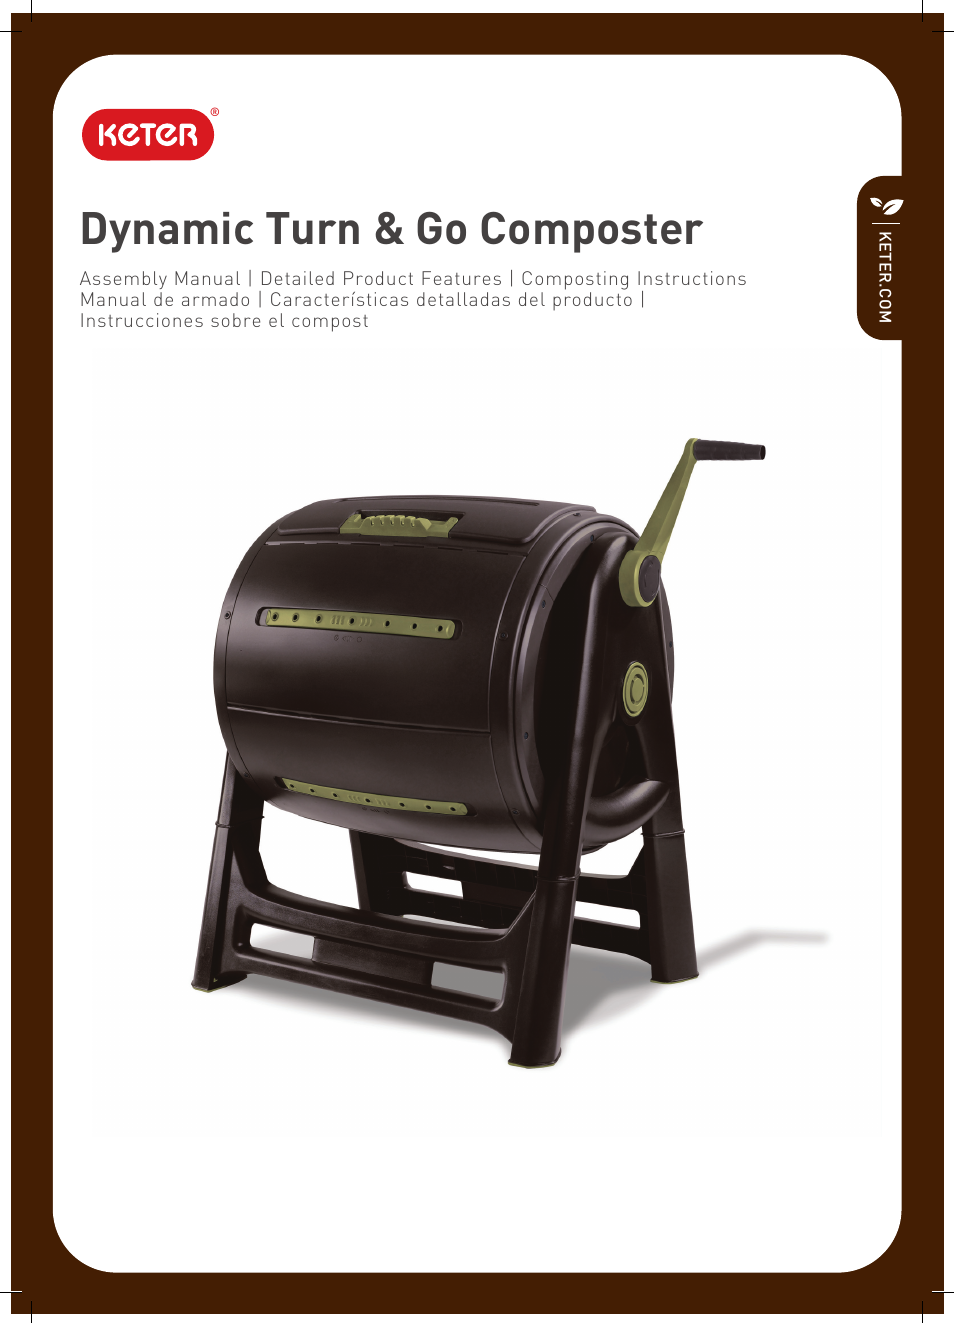 Keter Compost Mixer User Manual | 36 pages